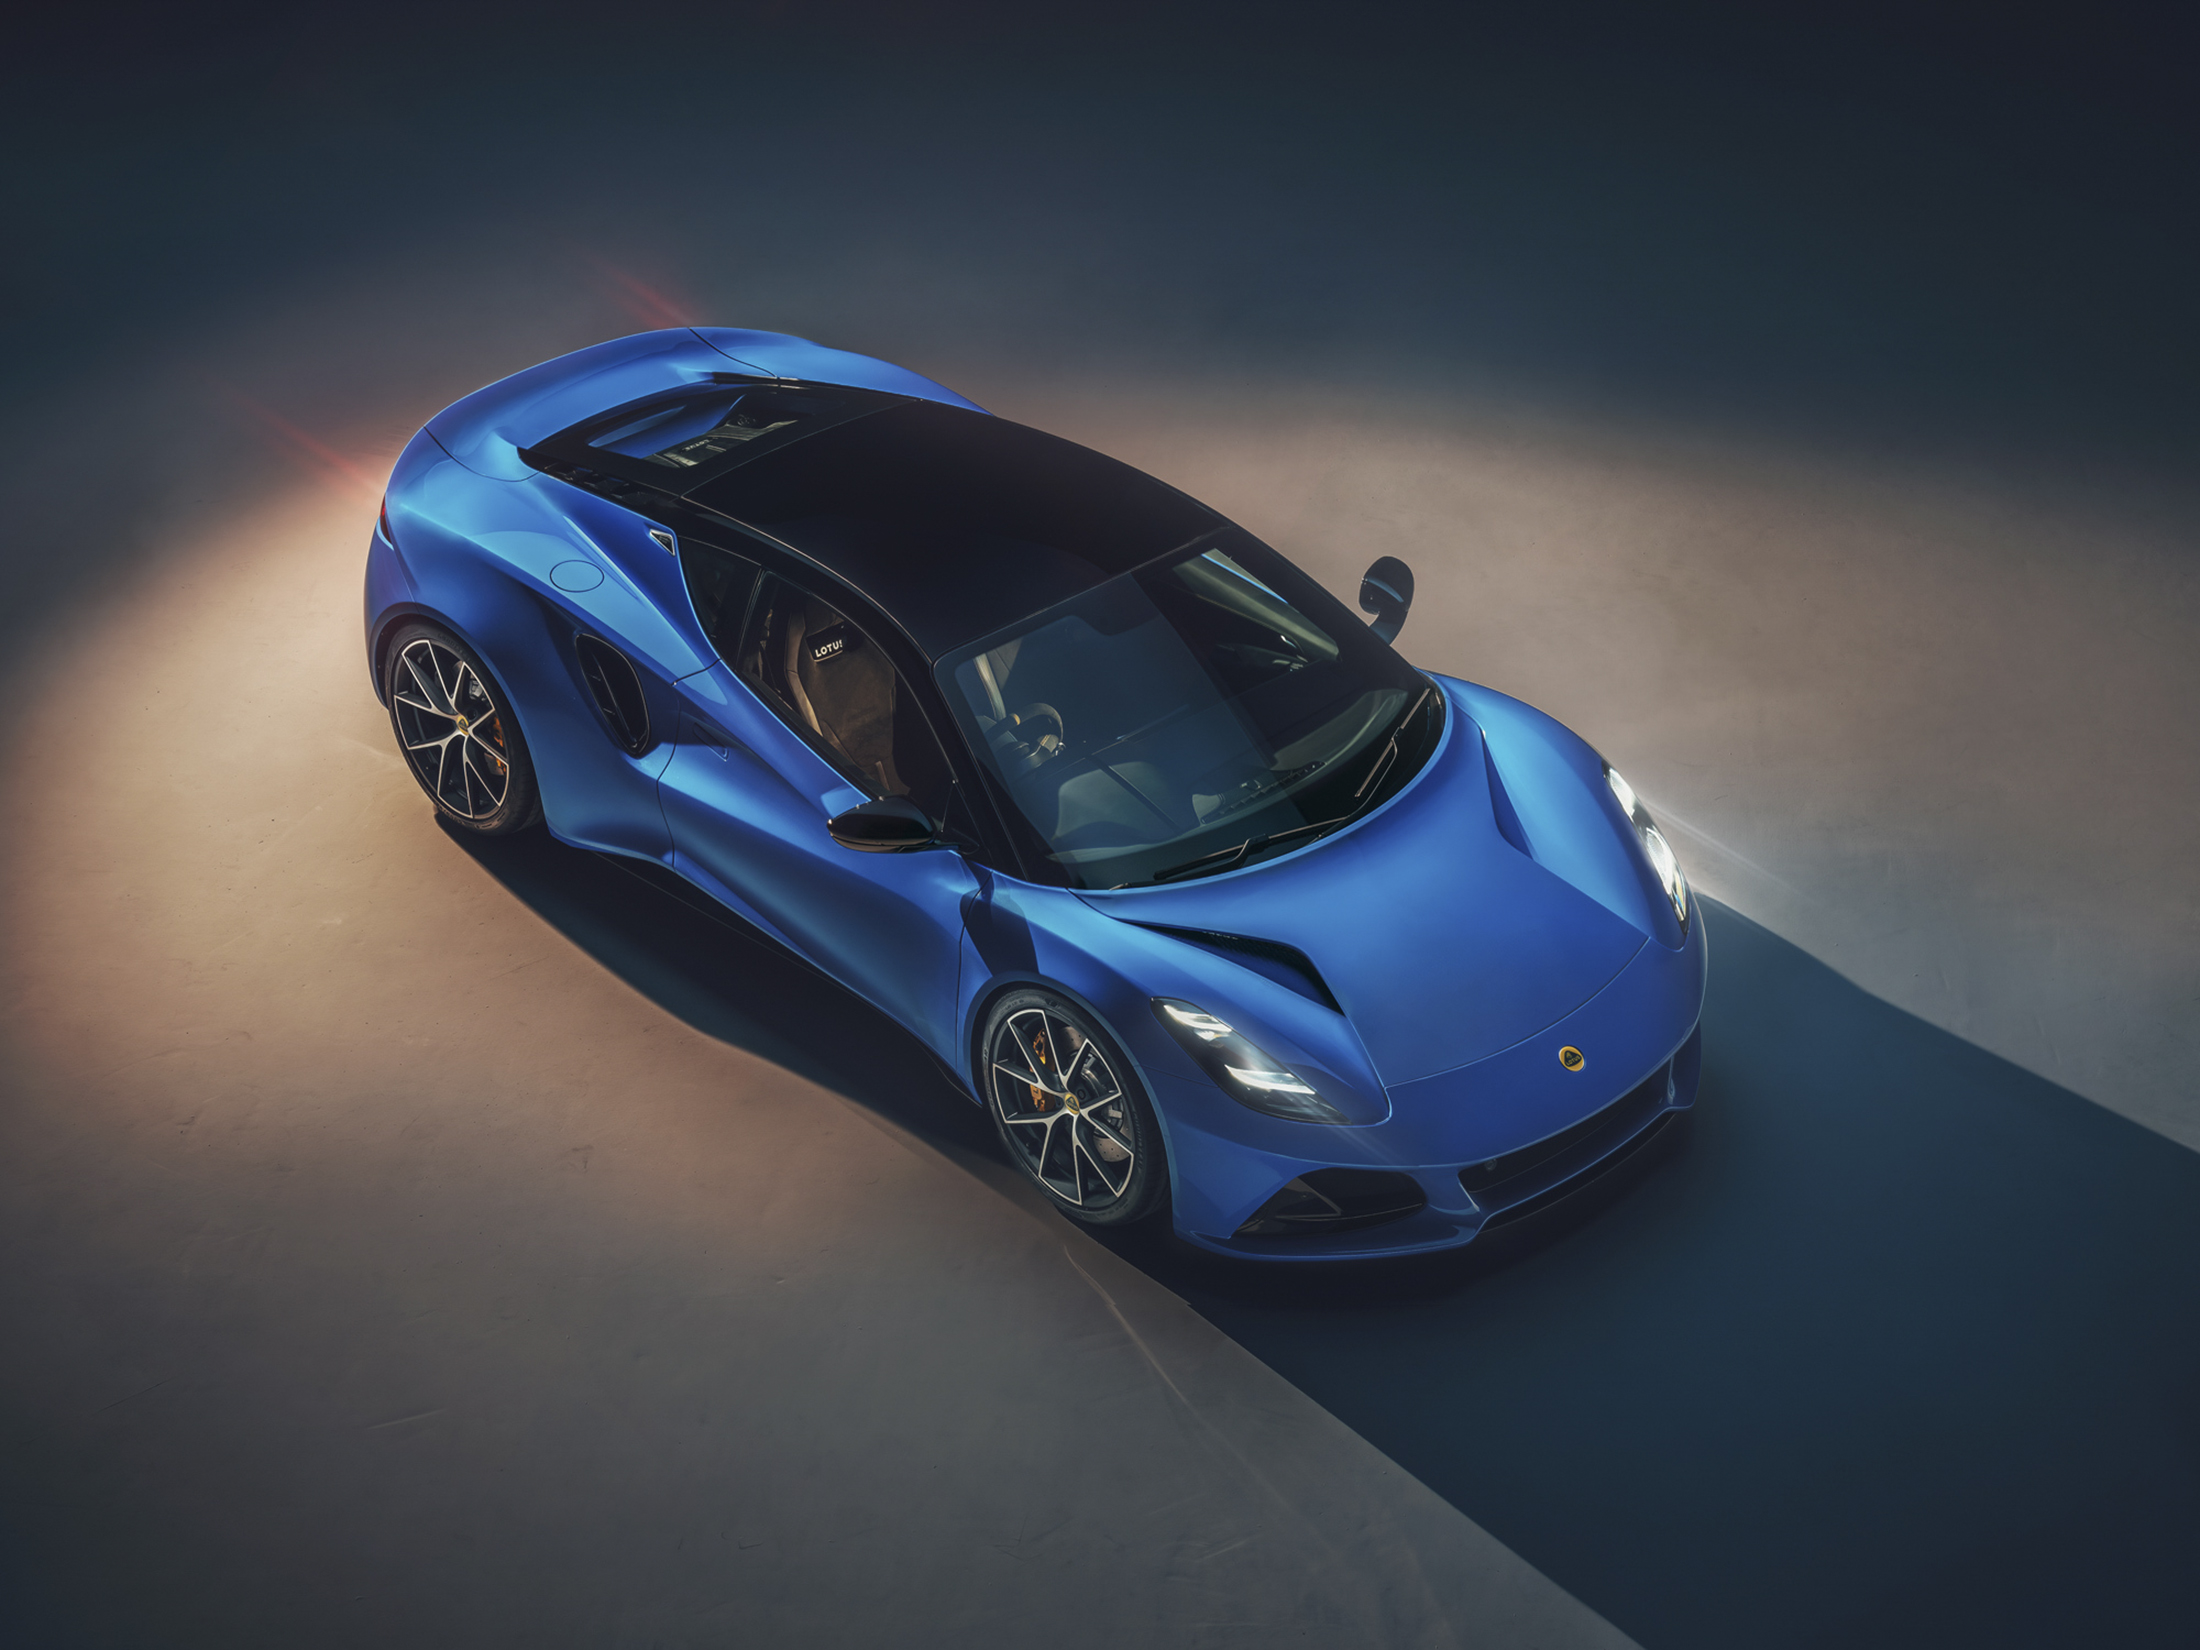 Lotus Unveils Last Combustion-Only Car Starting Under $85,000 - Bloomberg